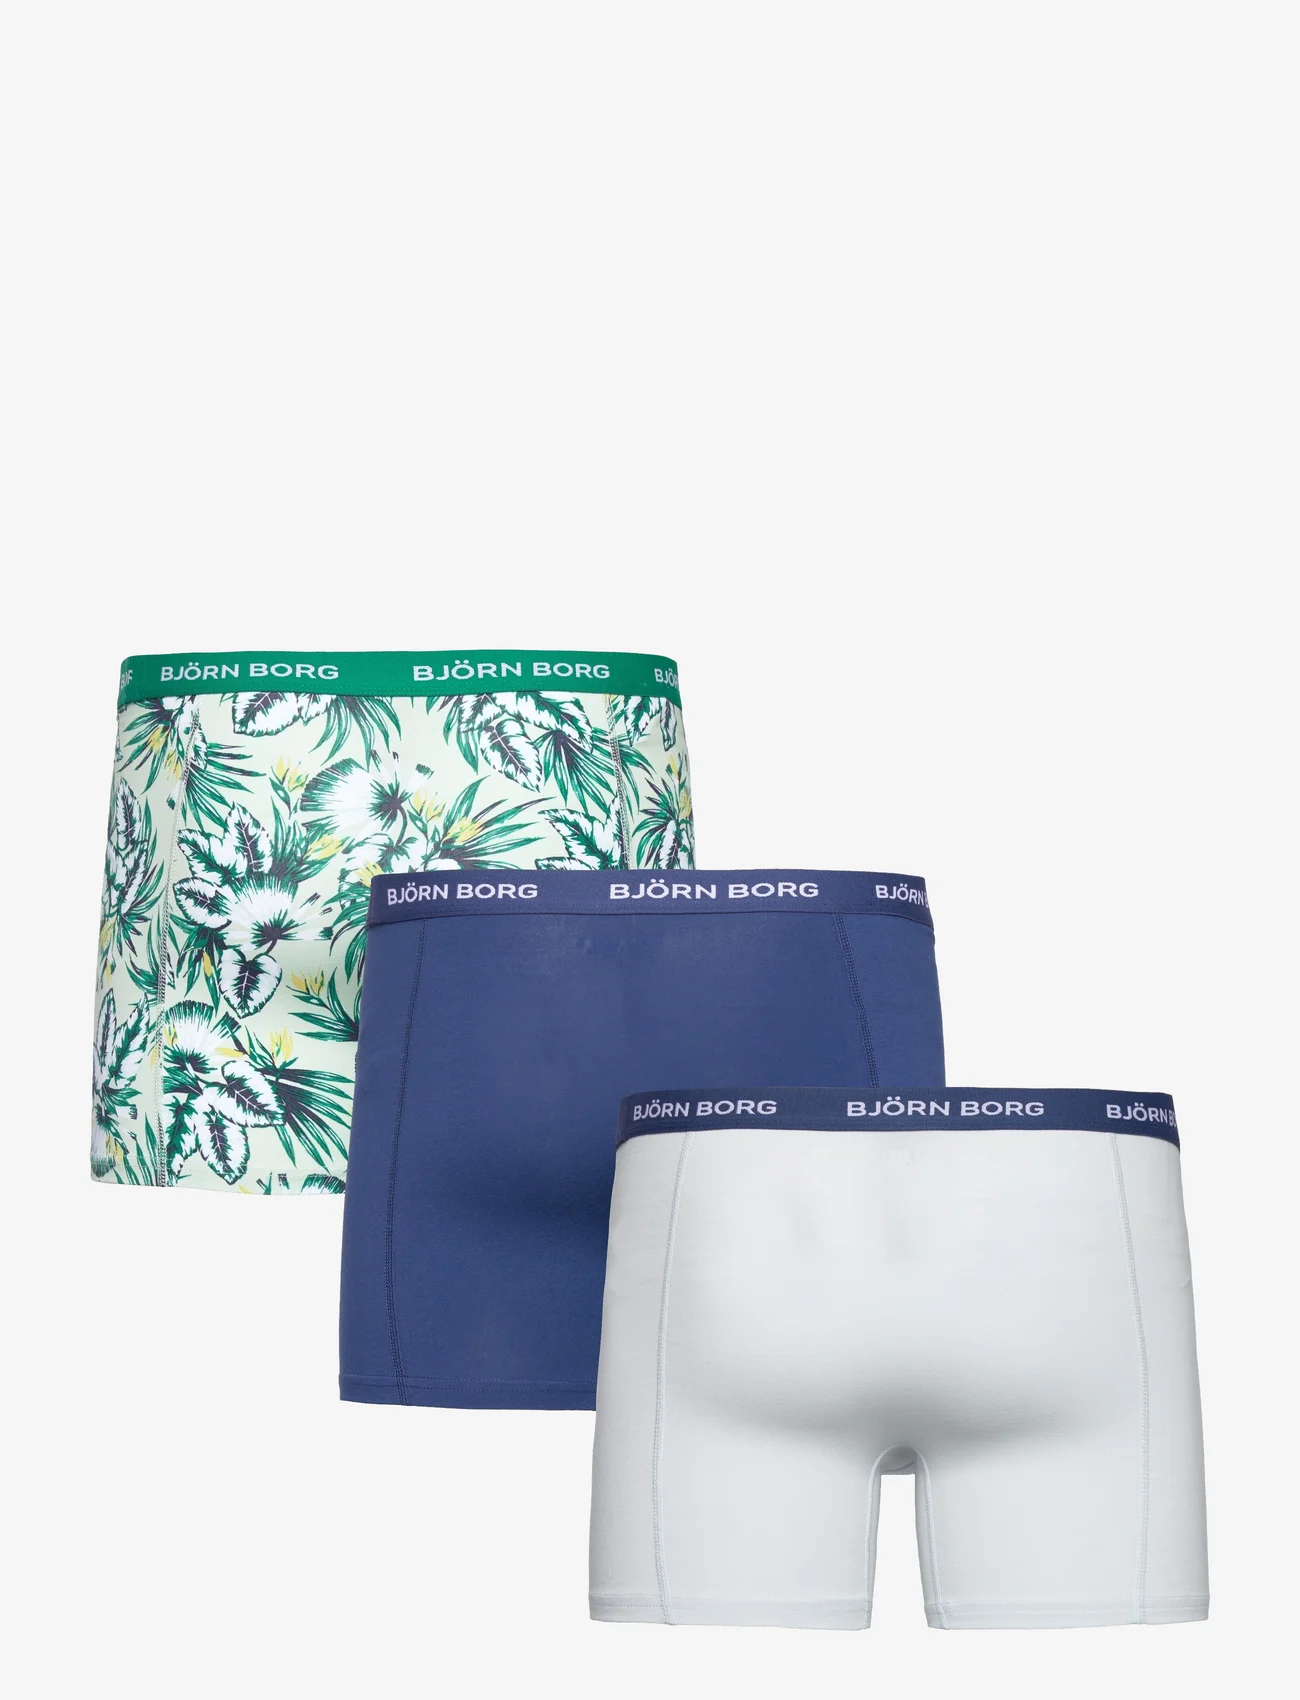 Björn Borg - COTTON STRETCH BOXER 3p - lowest prices - multipack 12 - 1